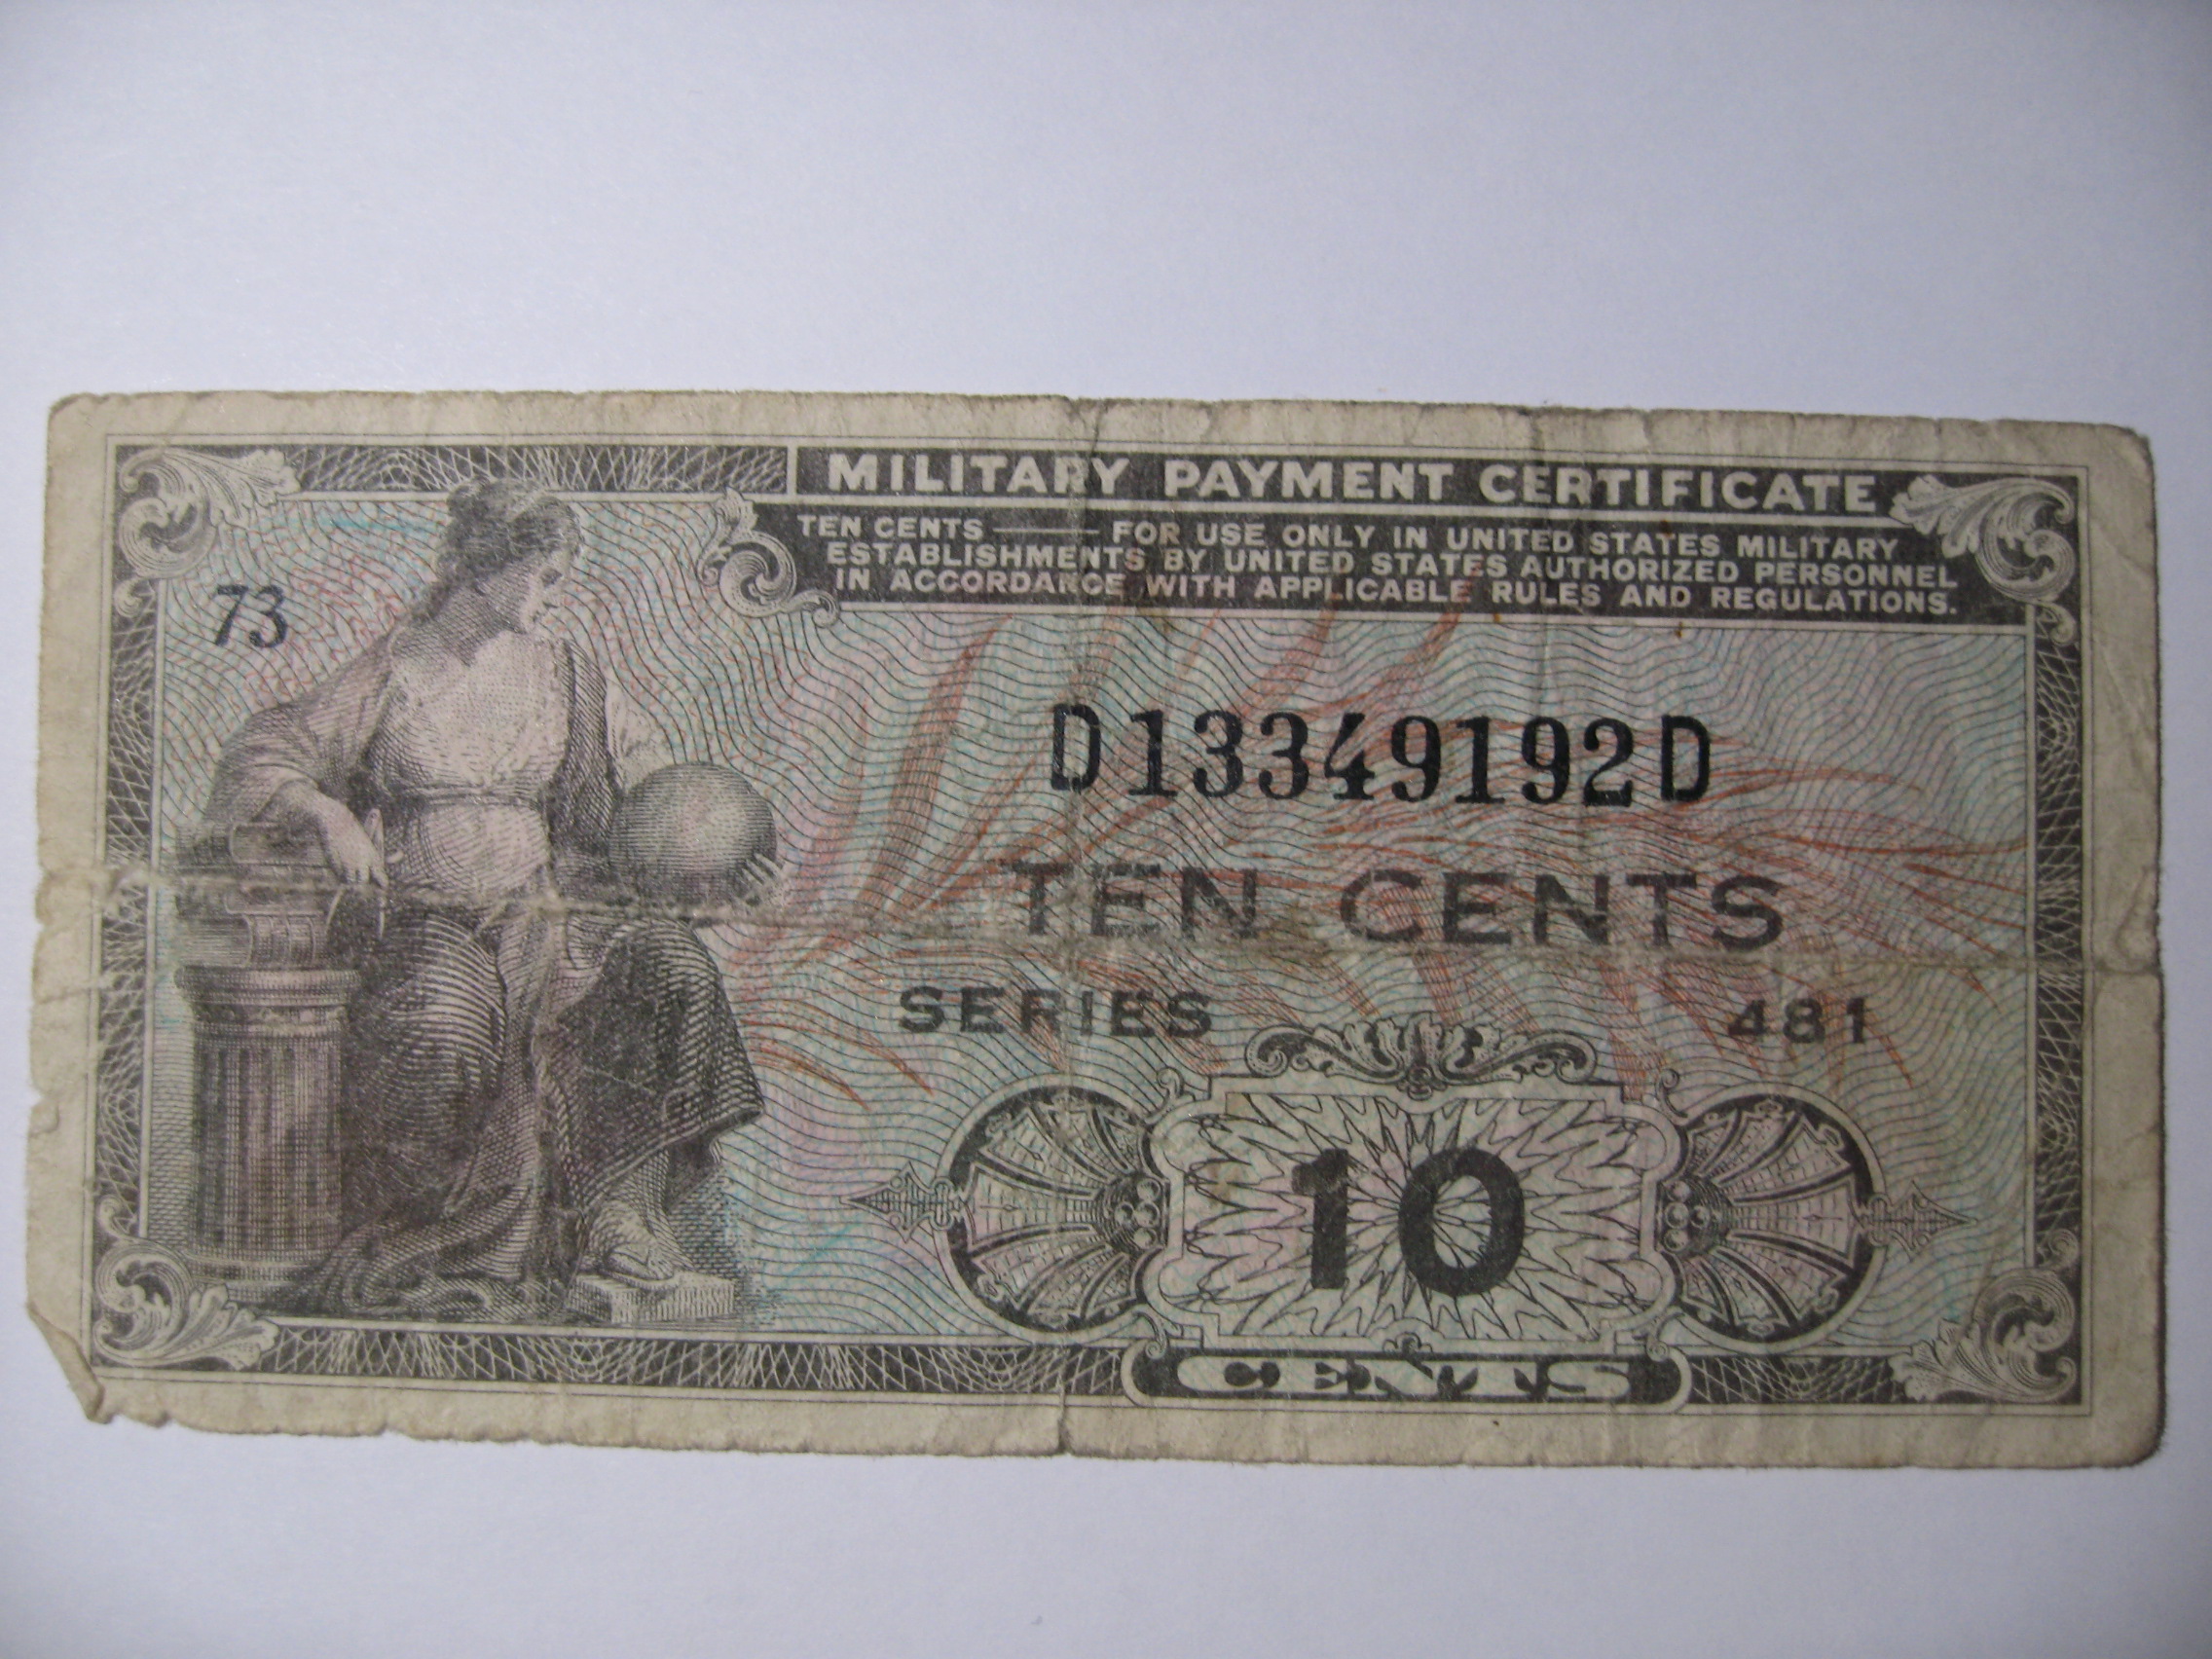 Military Payment Certificate Ten Cents Series 481 eBay